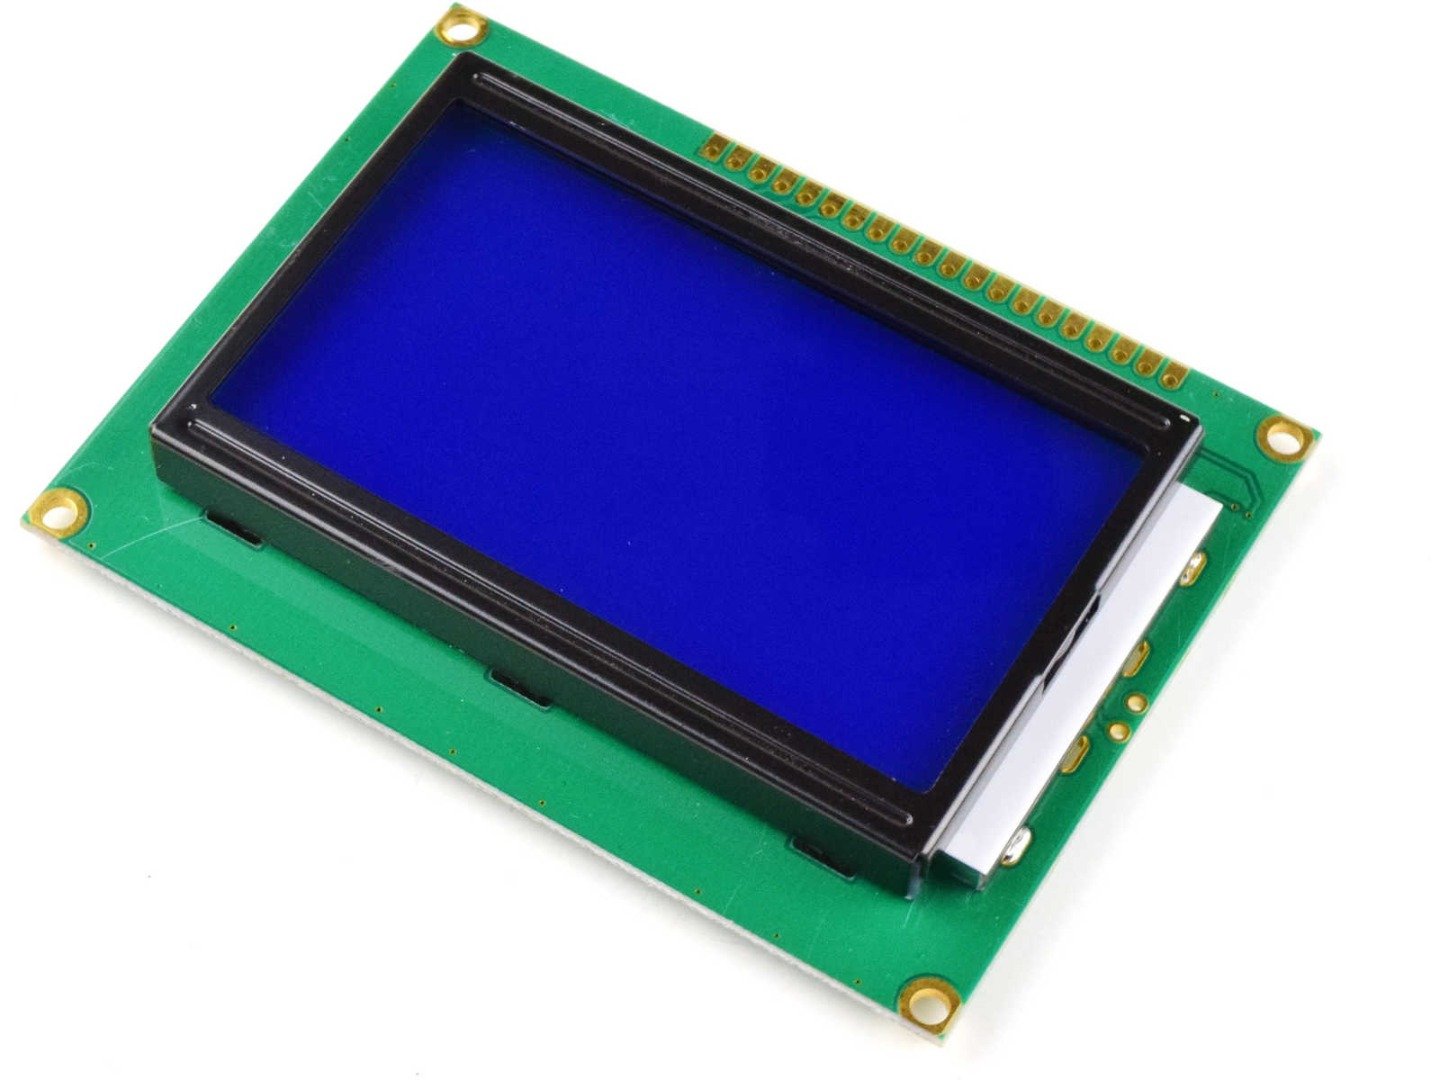 LCD12864 128×64 Graphic Display, blue/white, ST7920 9